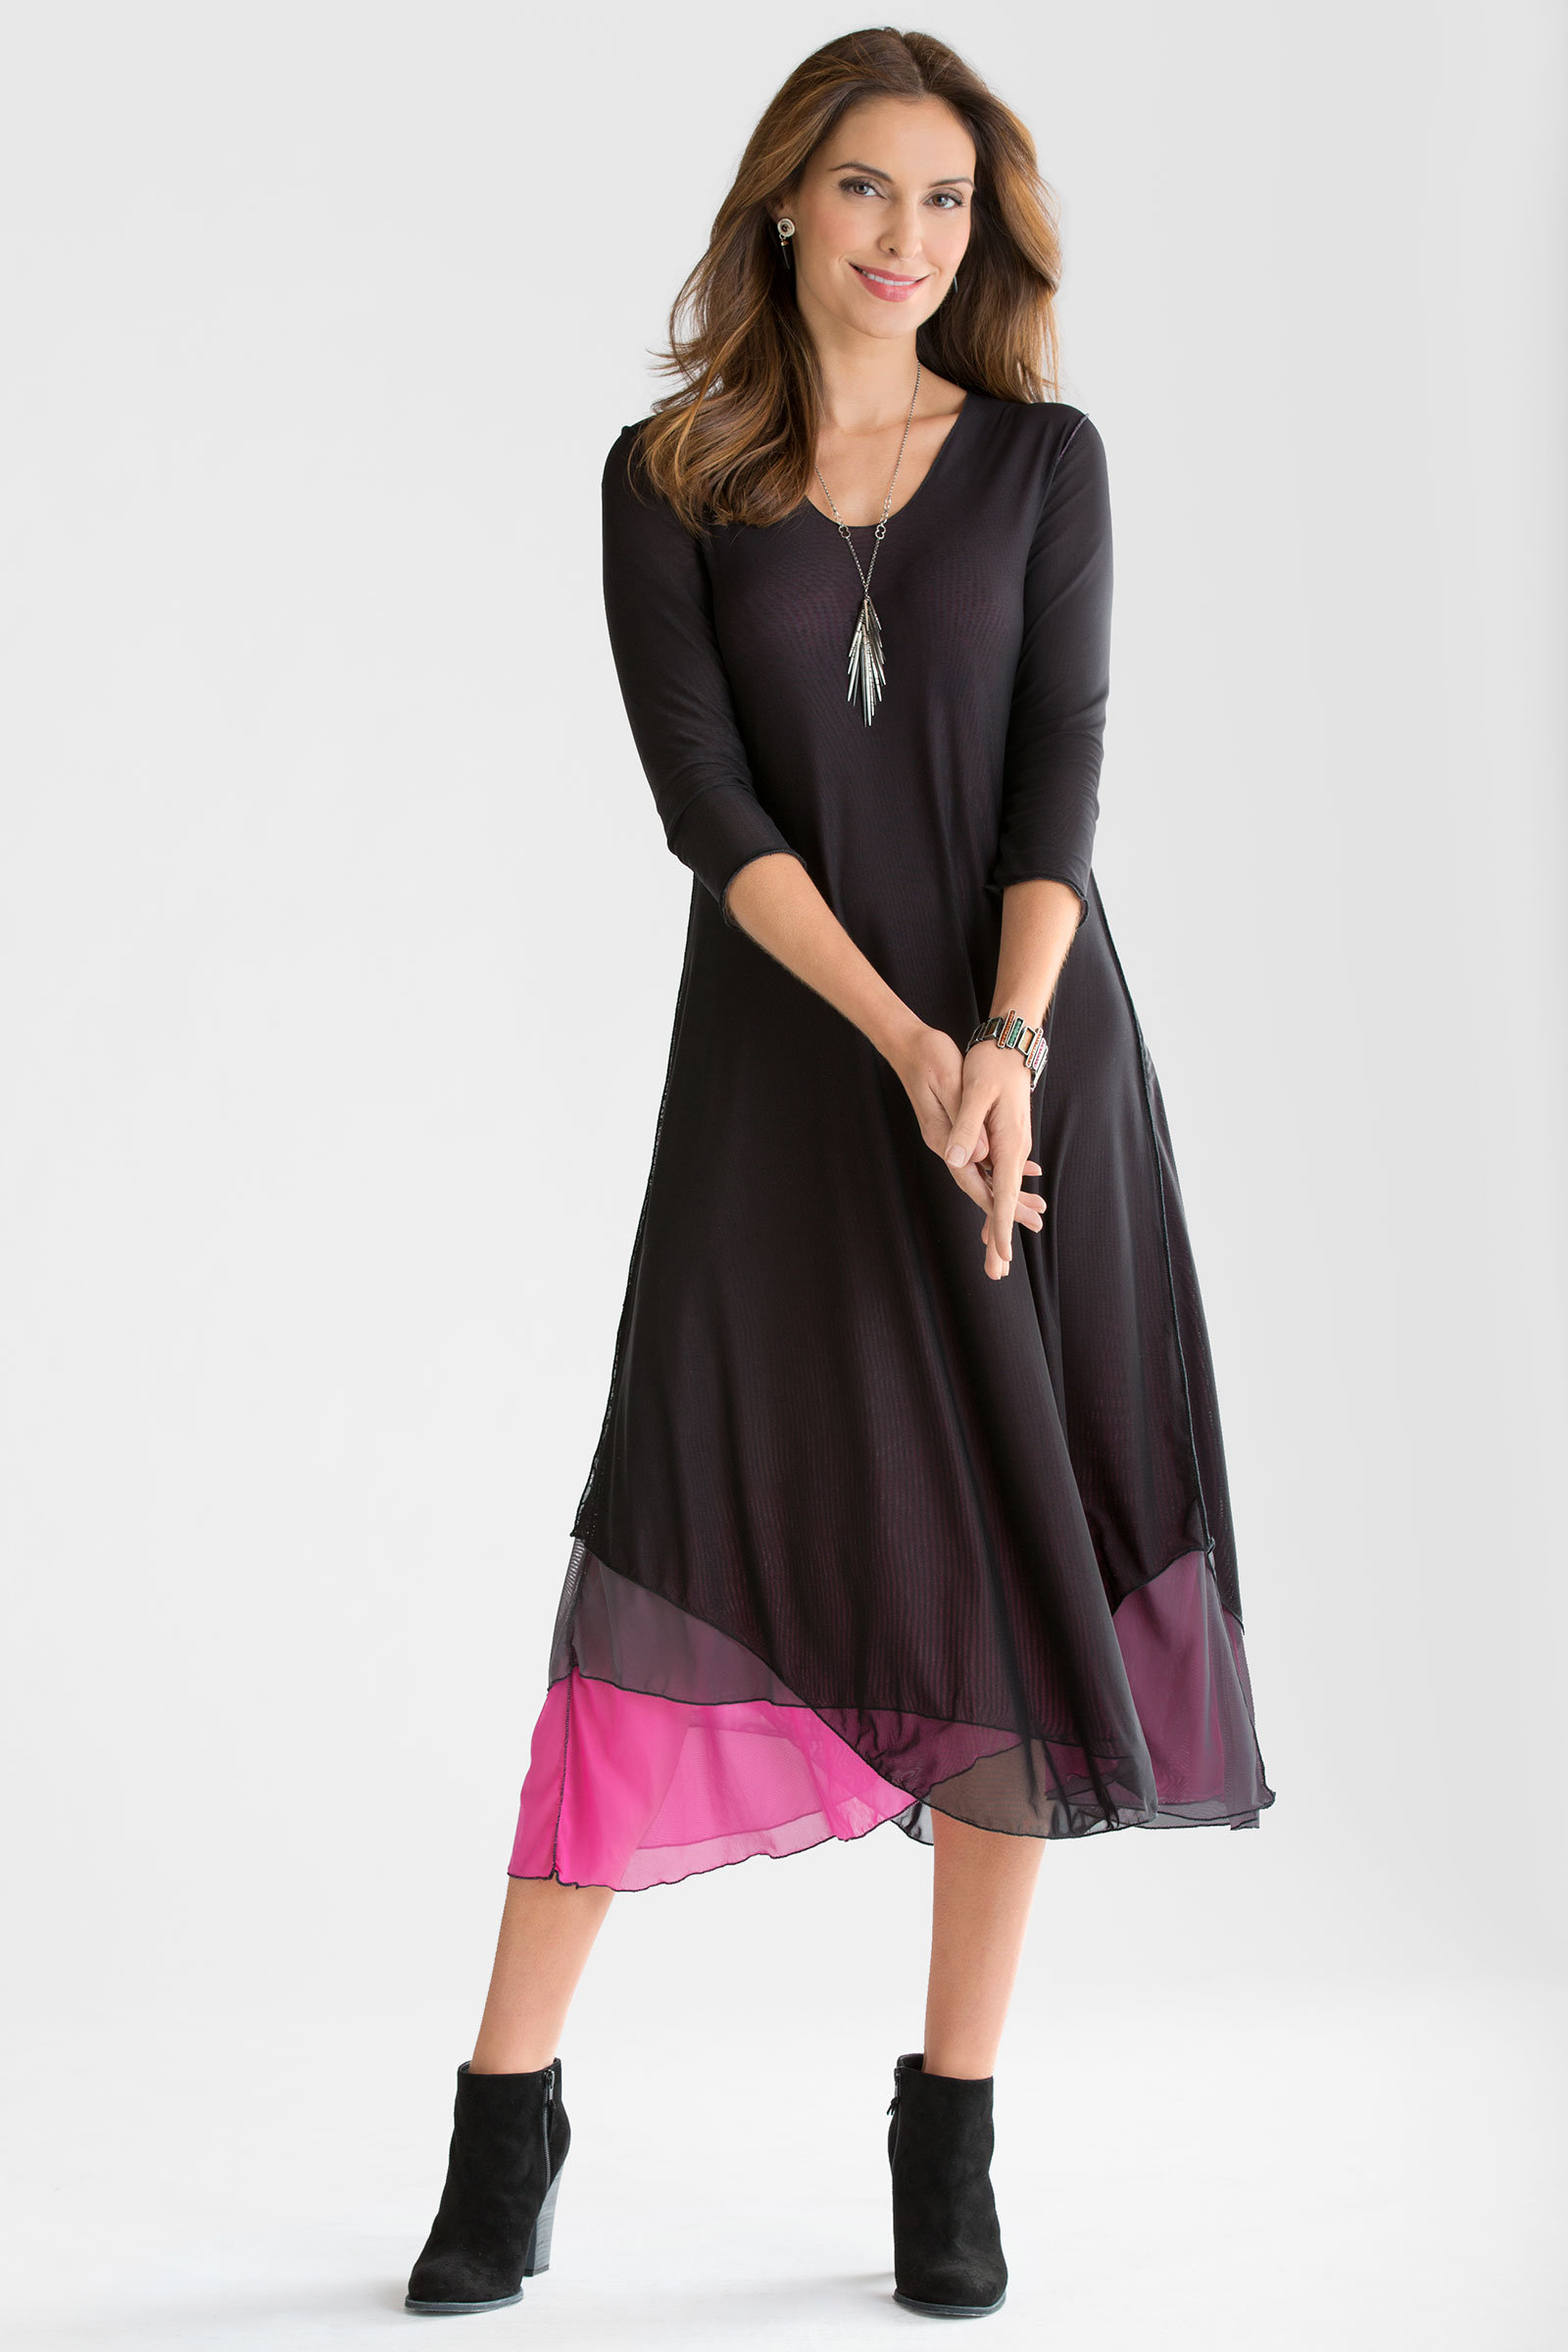 Ethereal Dress by Cynthia Ashby null (Knit Dress) | Artful Home